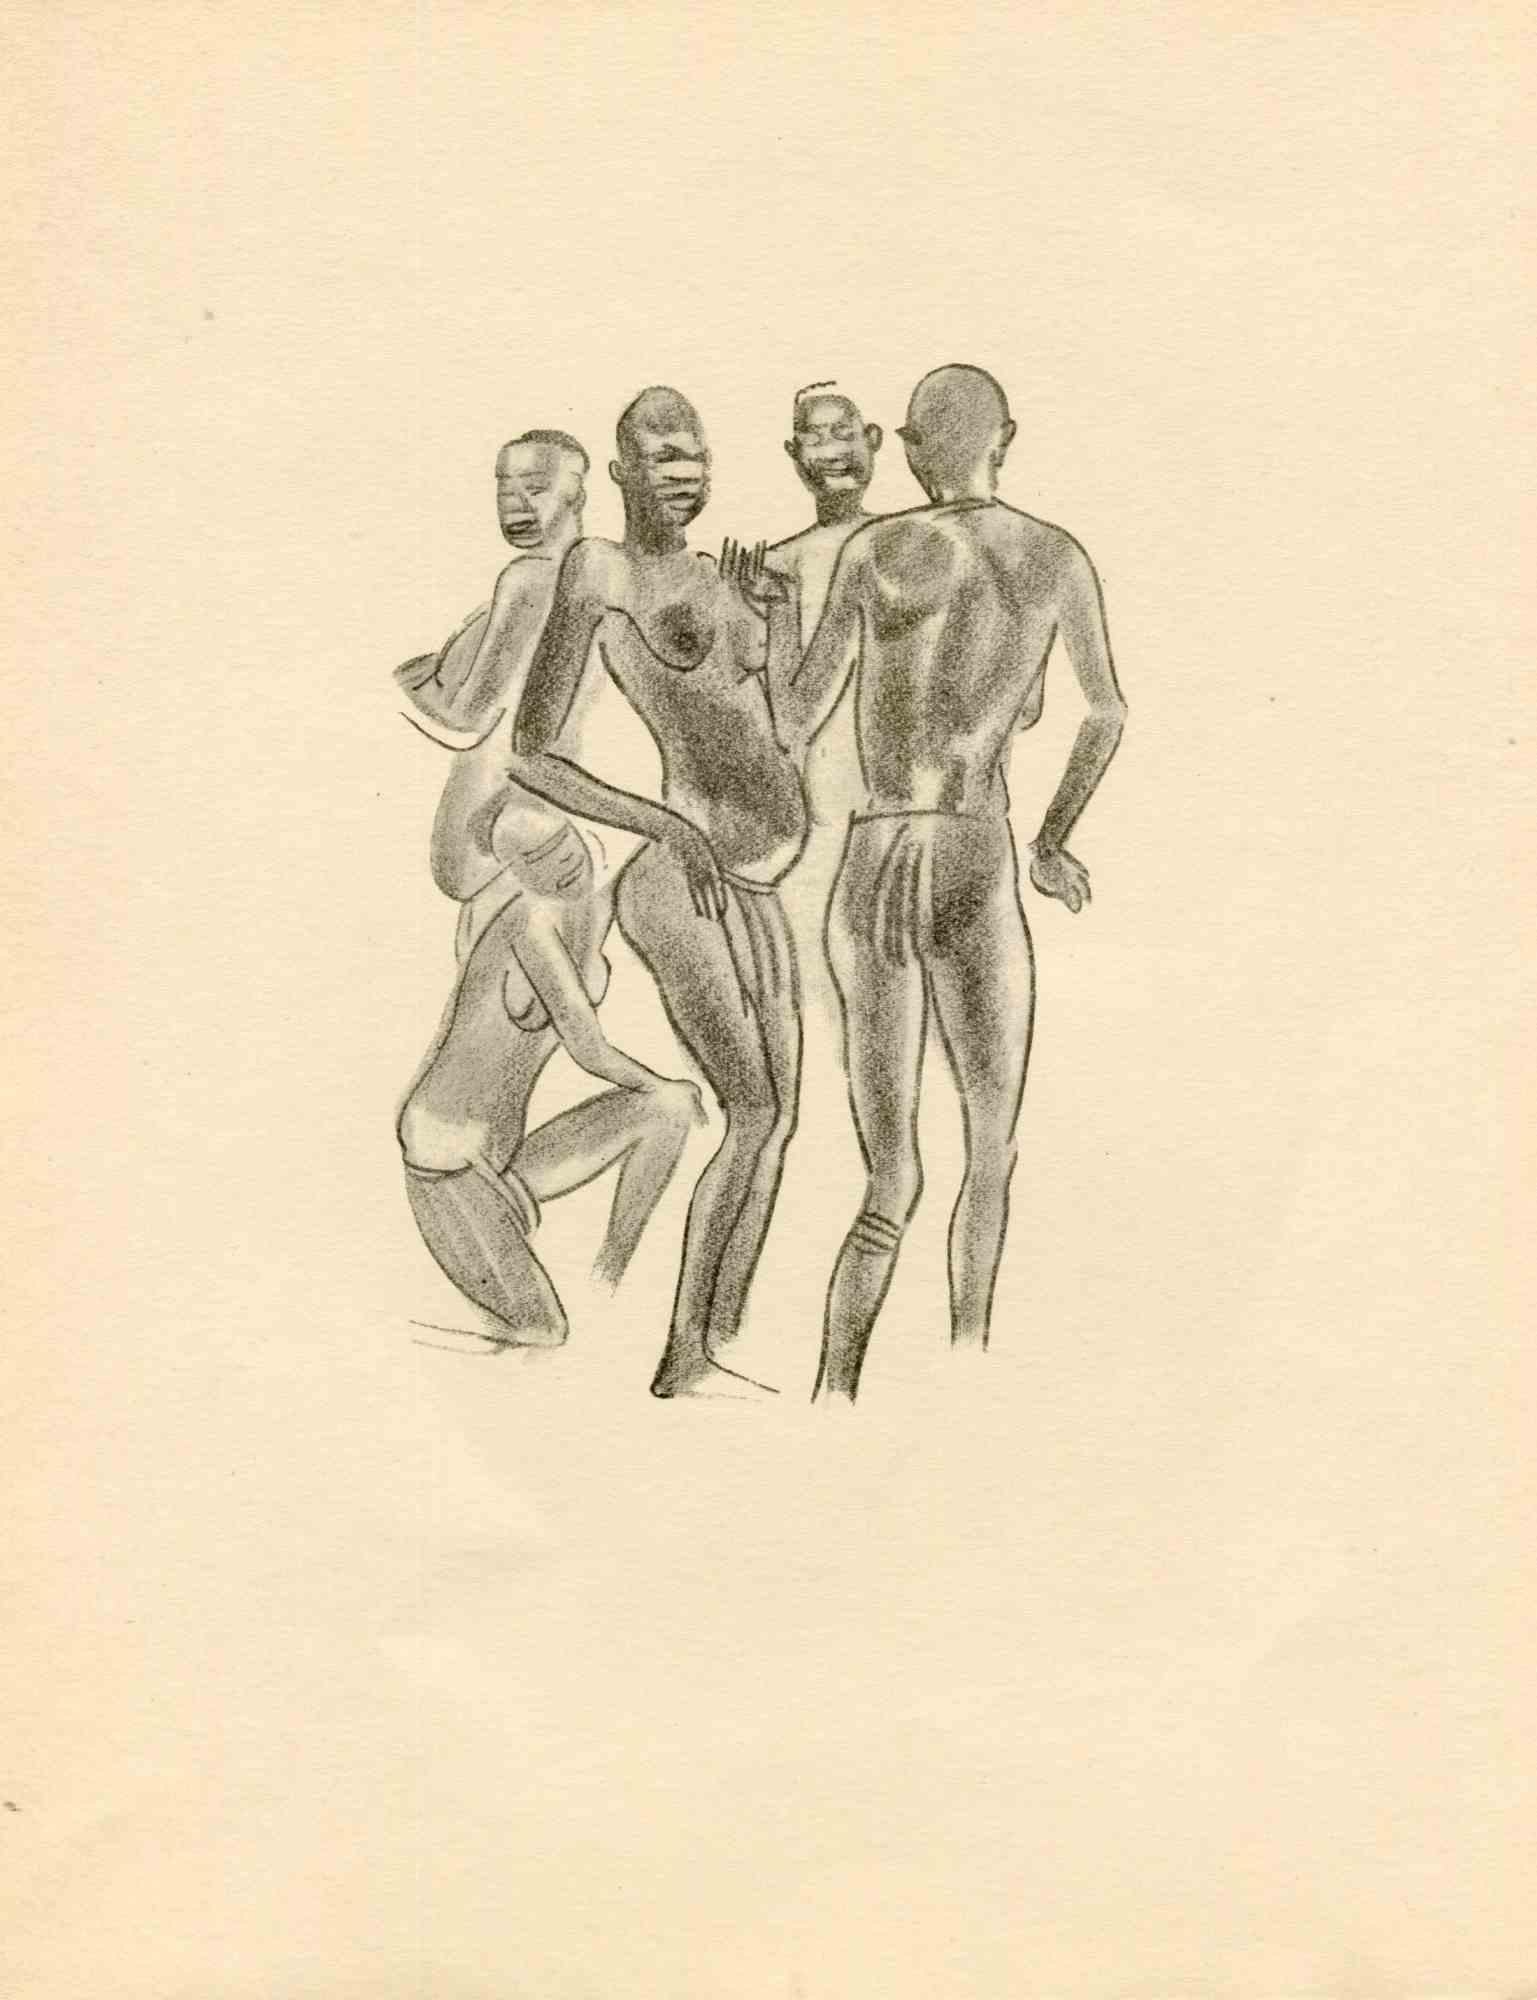 Tribal Men is an original lithograph realized in the early 1930s by Emmanuel Gondouin, (Versailles, 1883 - Parigi, 1934) 
 
The artwork is depicted through strong strokes and is part of a series entitled "Africa". 
 
Emmanuel Gondouin is a French